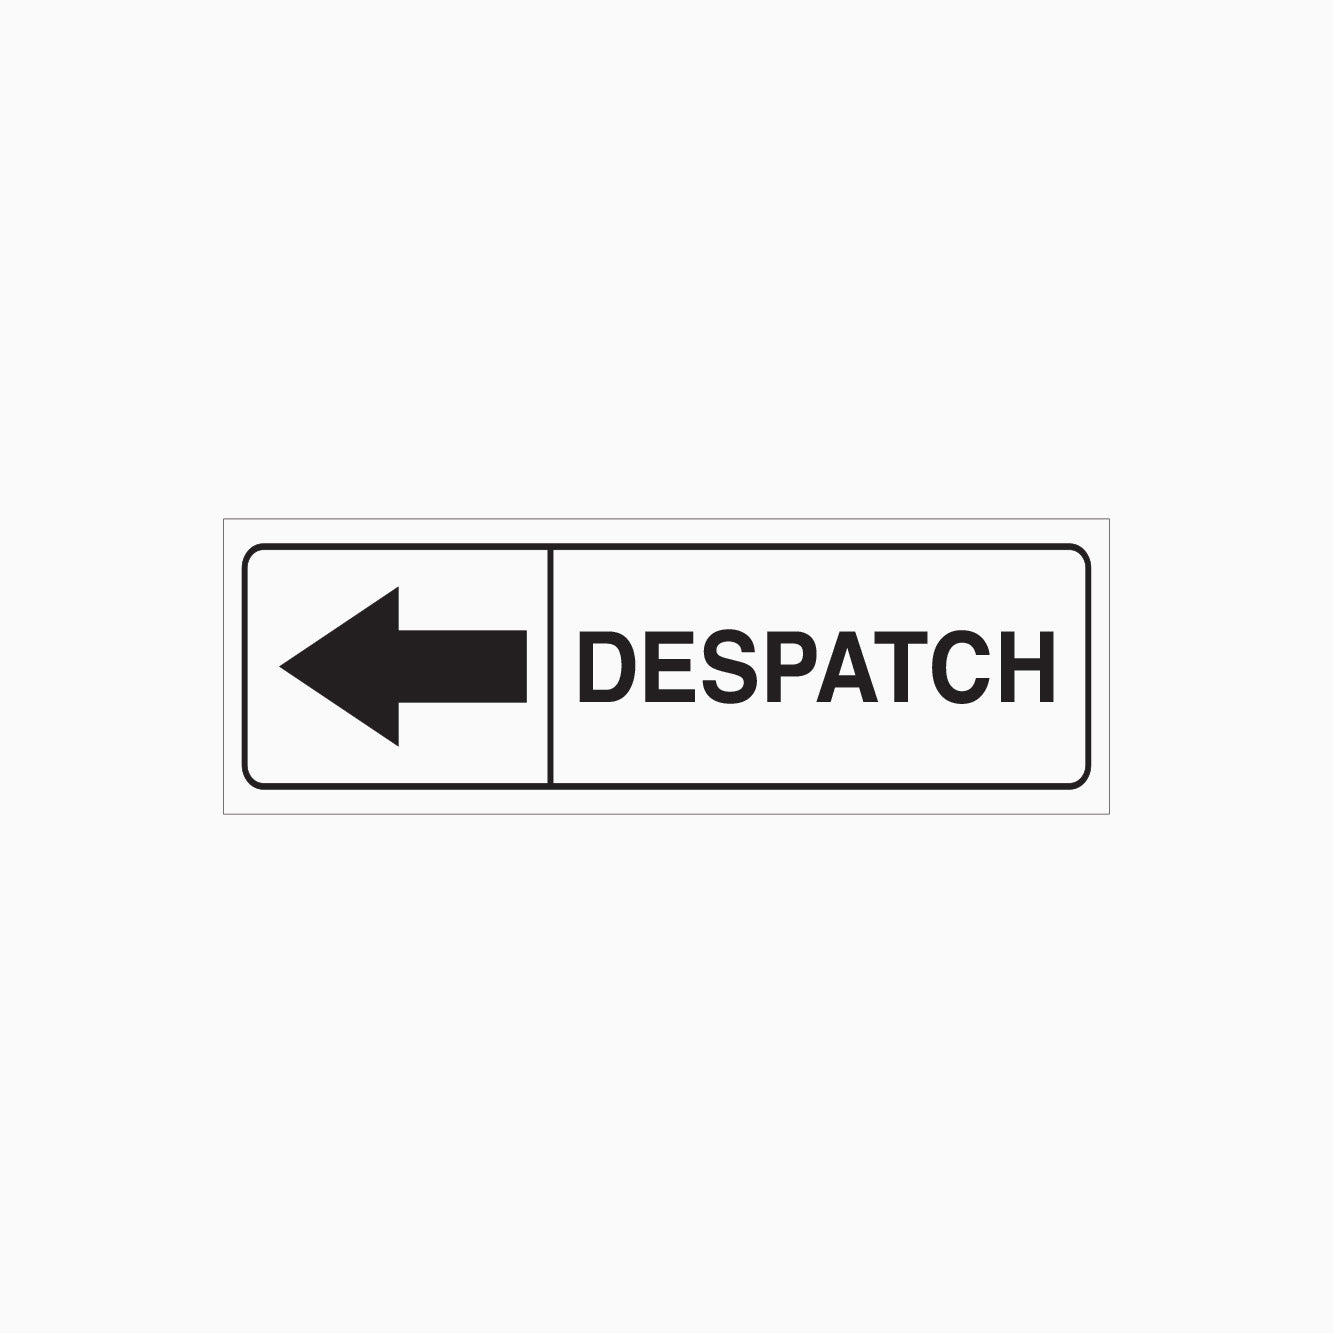 DESPATCH SIGN - LEFT AND RIGHT POINT